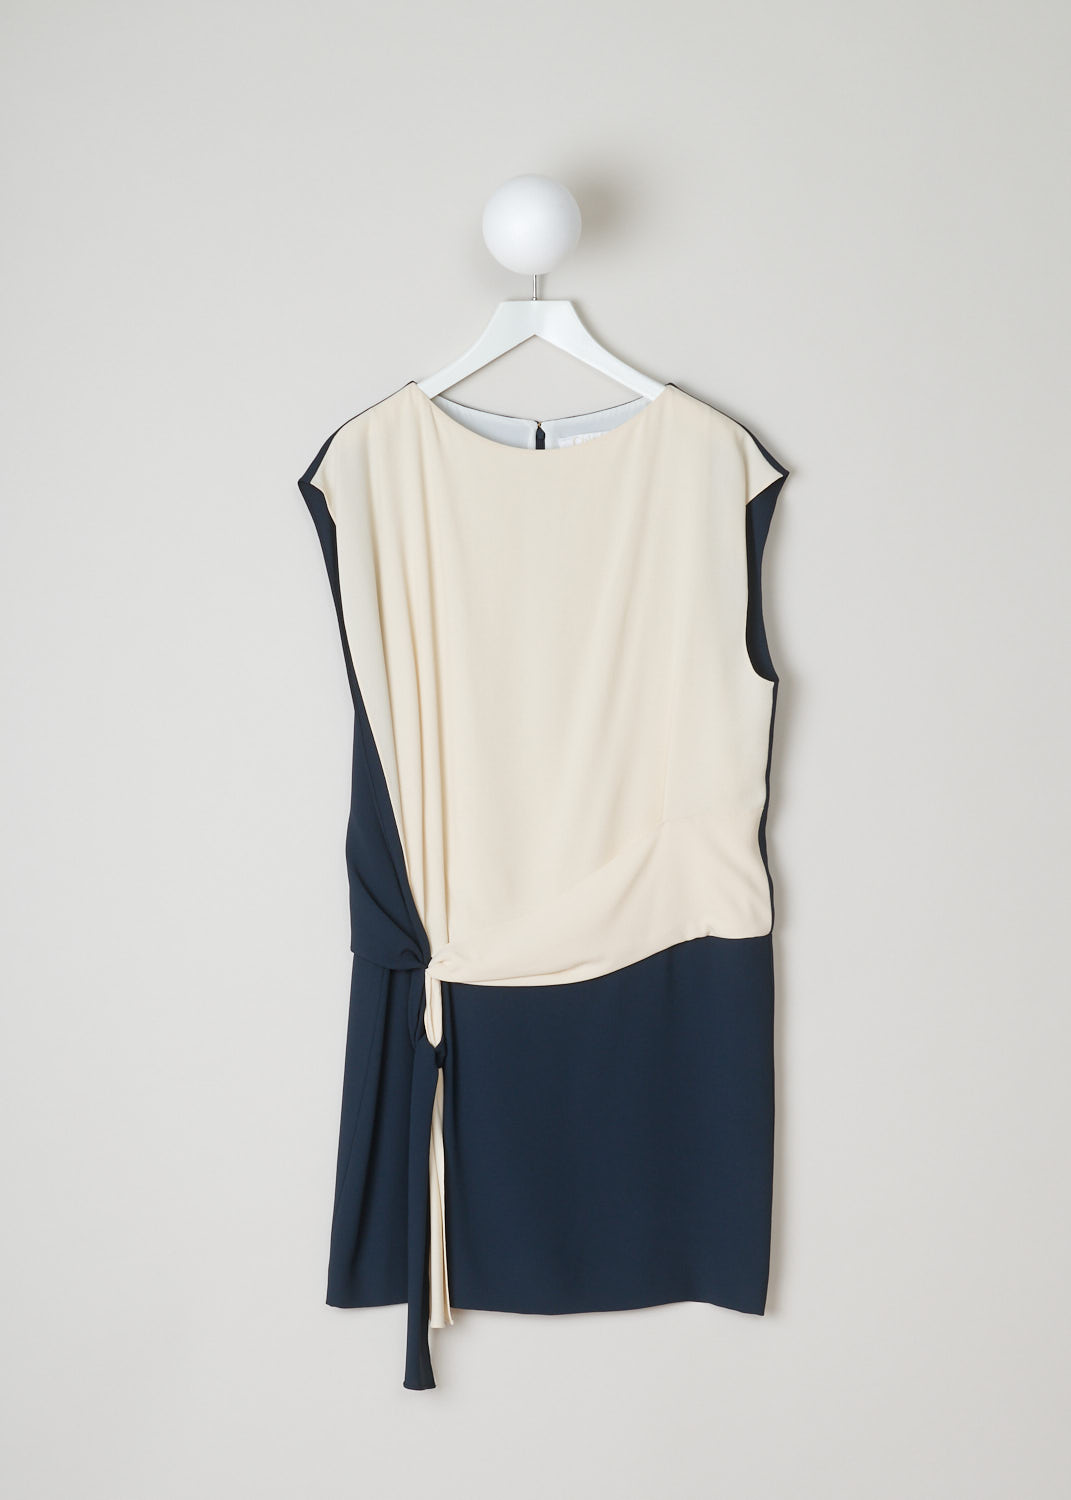 ChloÃ©, Dropped waist dress in beige and blue, 15SRO18_15S238_1Z7_black_navy_vanilla, blue beige, front. Dropped waist dress, sharing some similarities with a wrap dress. The blue and beige wrap ribbon can be tied into various knots. Furthermore, this sleeveless model has a round neckline and a concealed zipper with a metal clip on the back. 